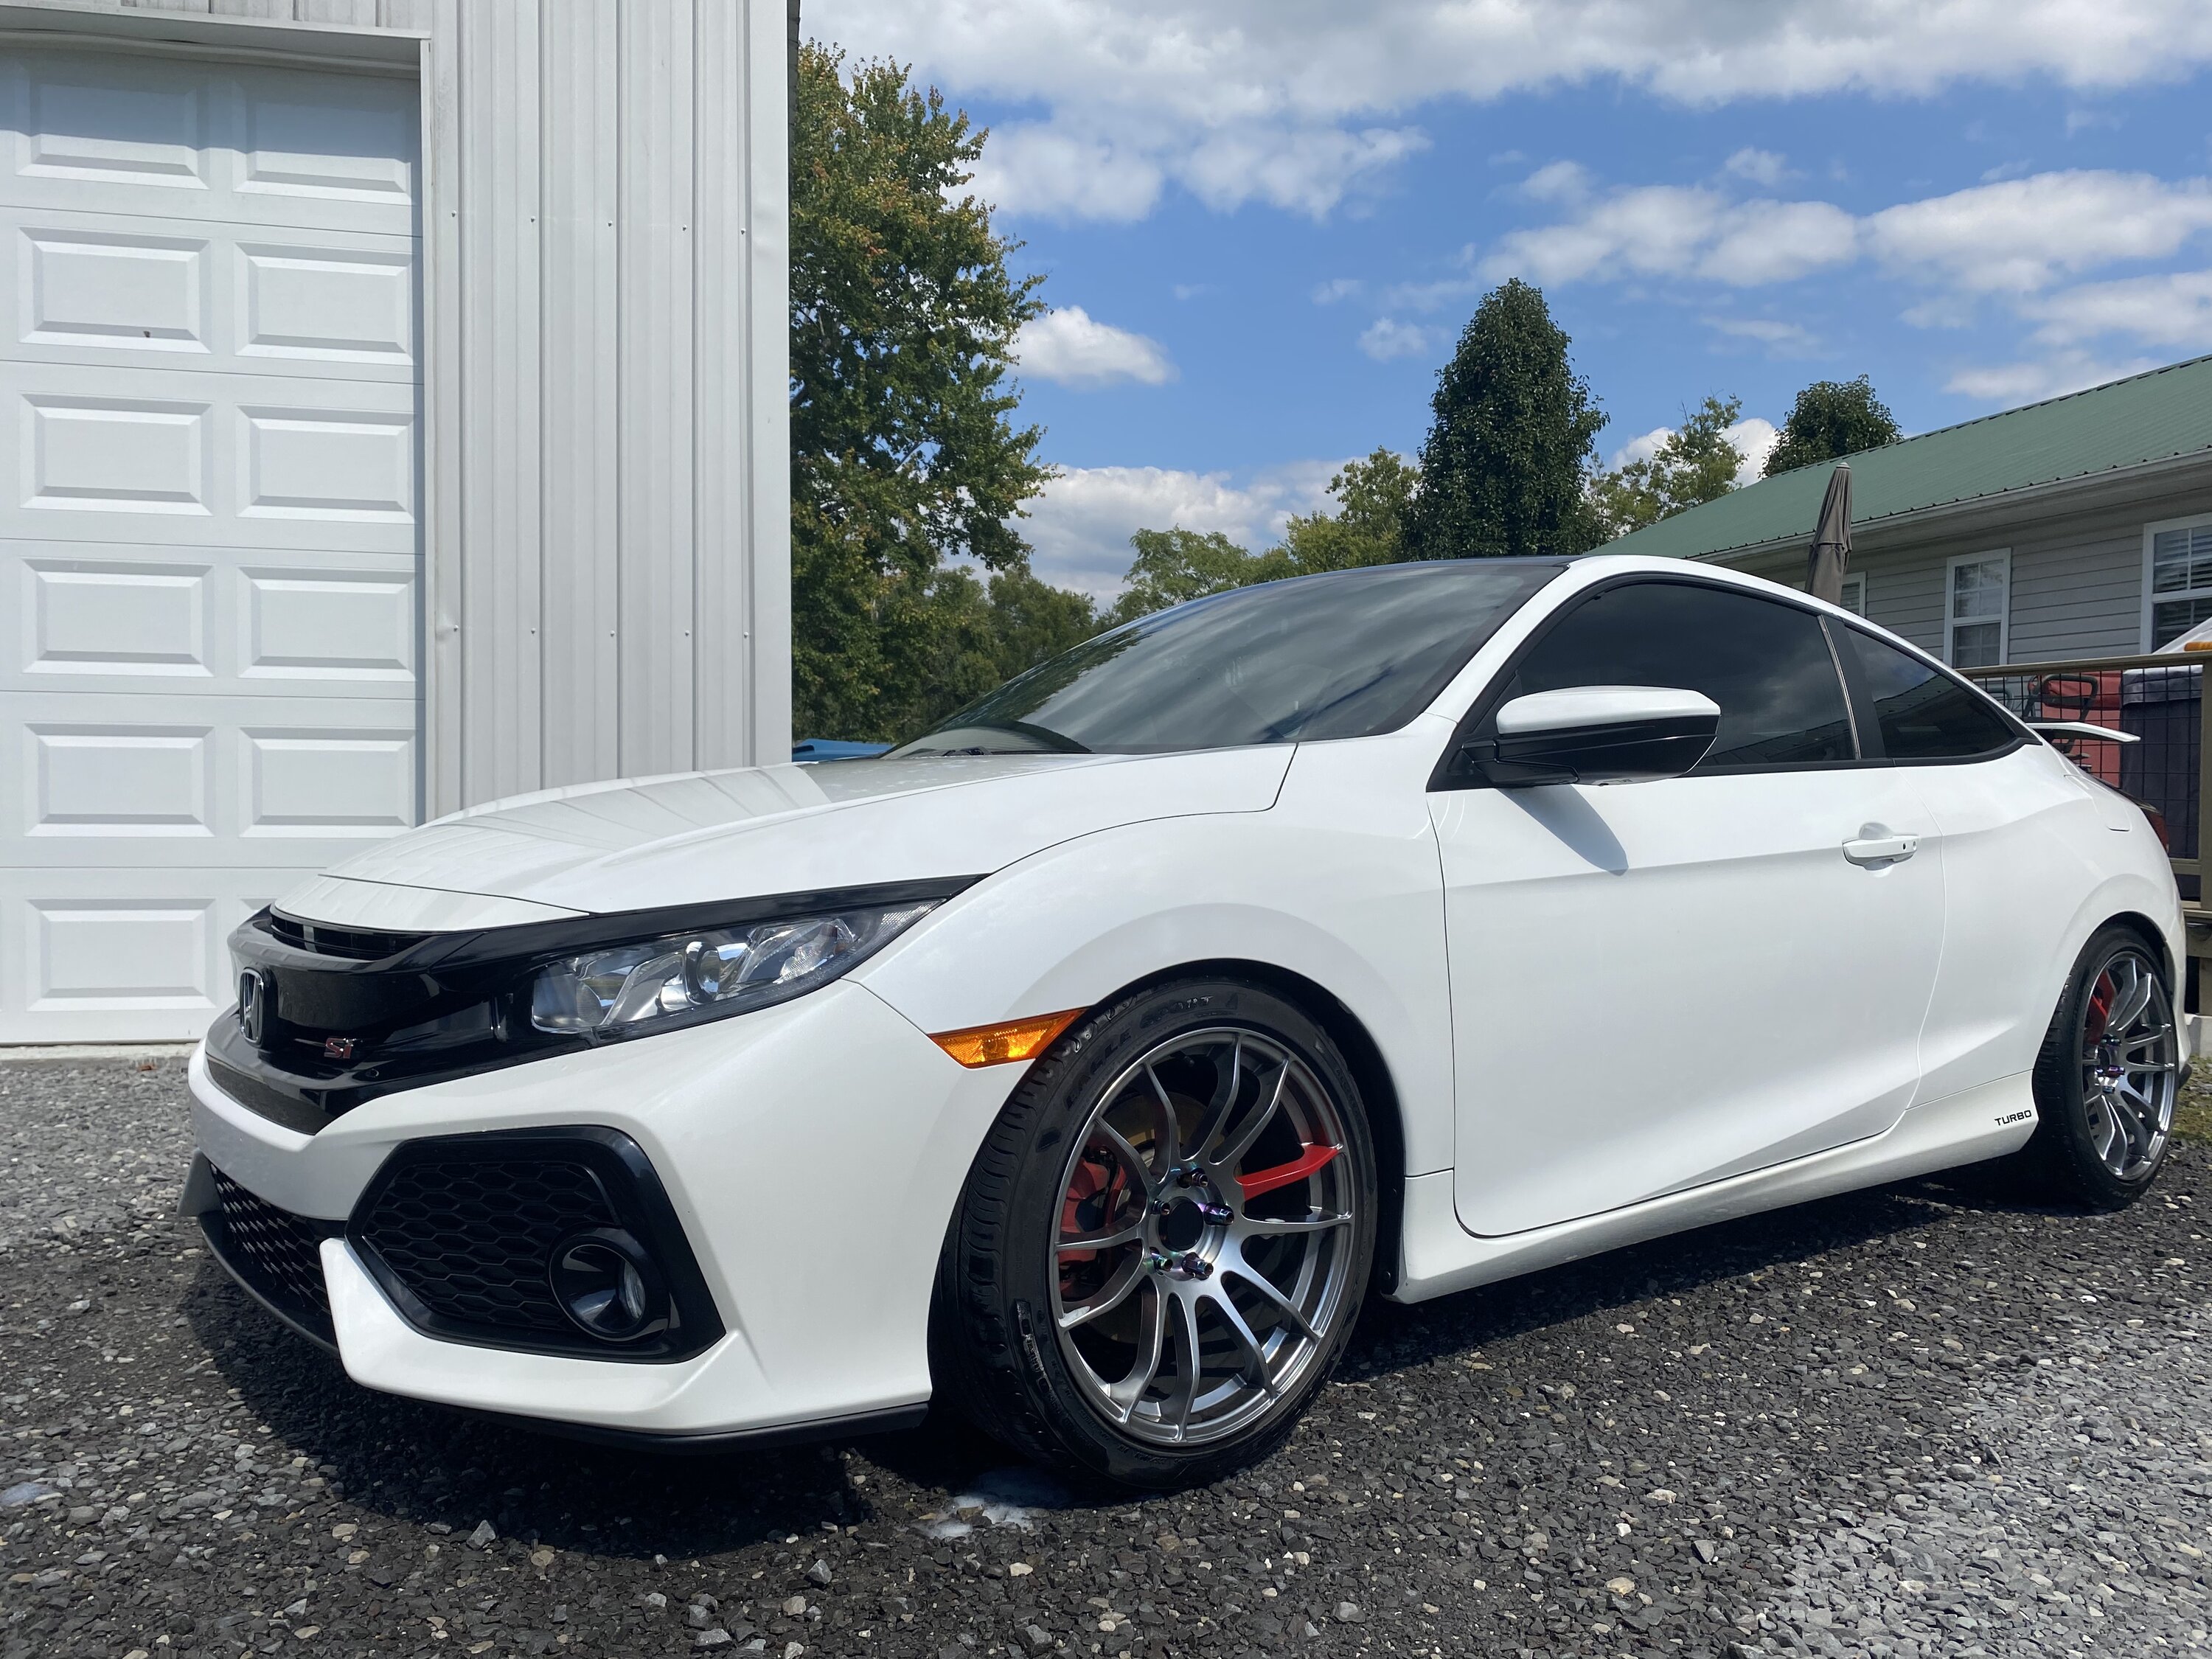 Honda Civic 10th gen What's your SI looking like today? 0CFE1BFF-5631-42A7-A6F1-8717D2D7D5D8